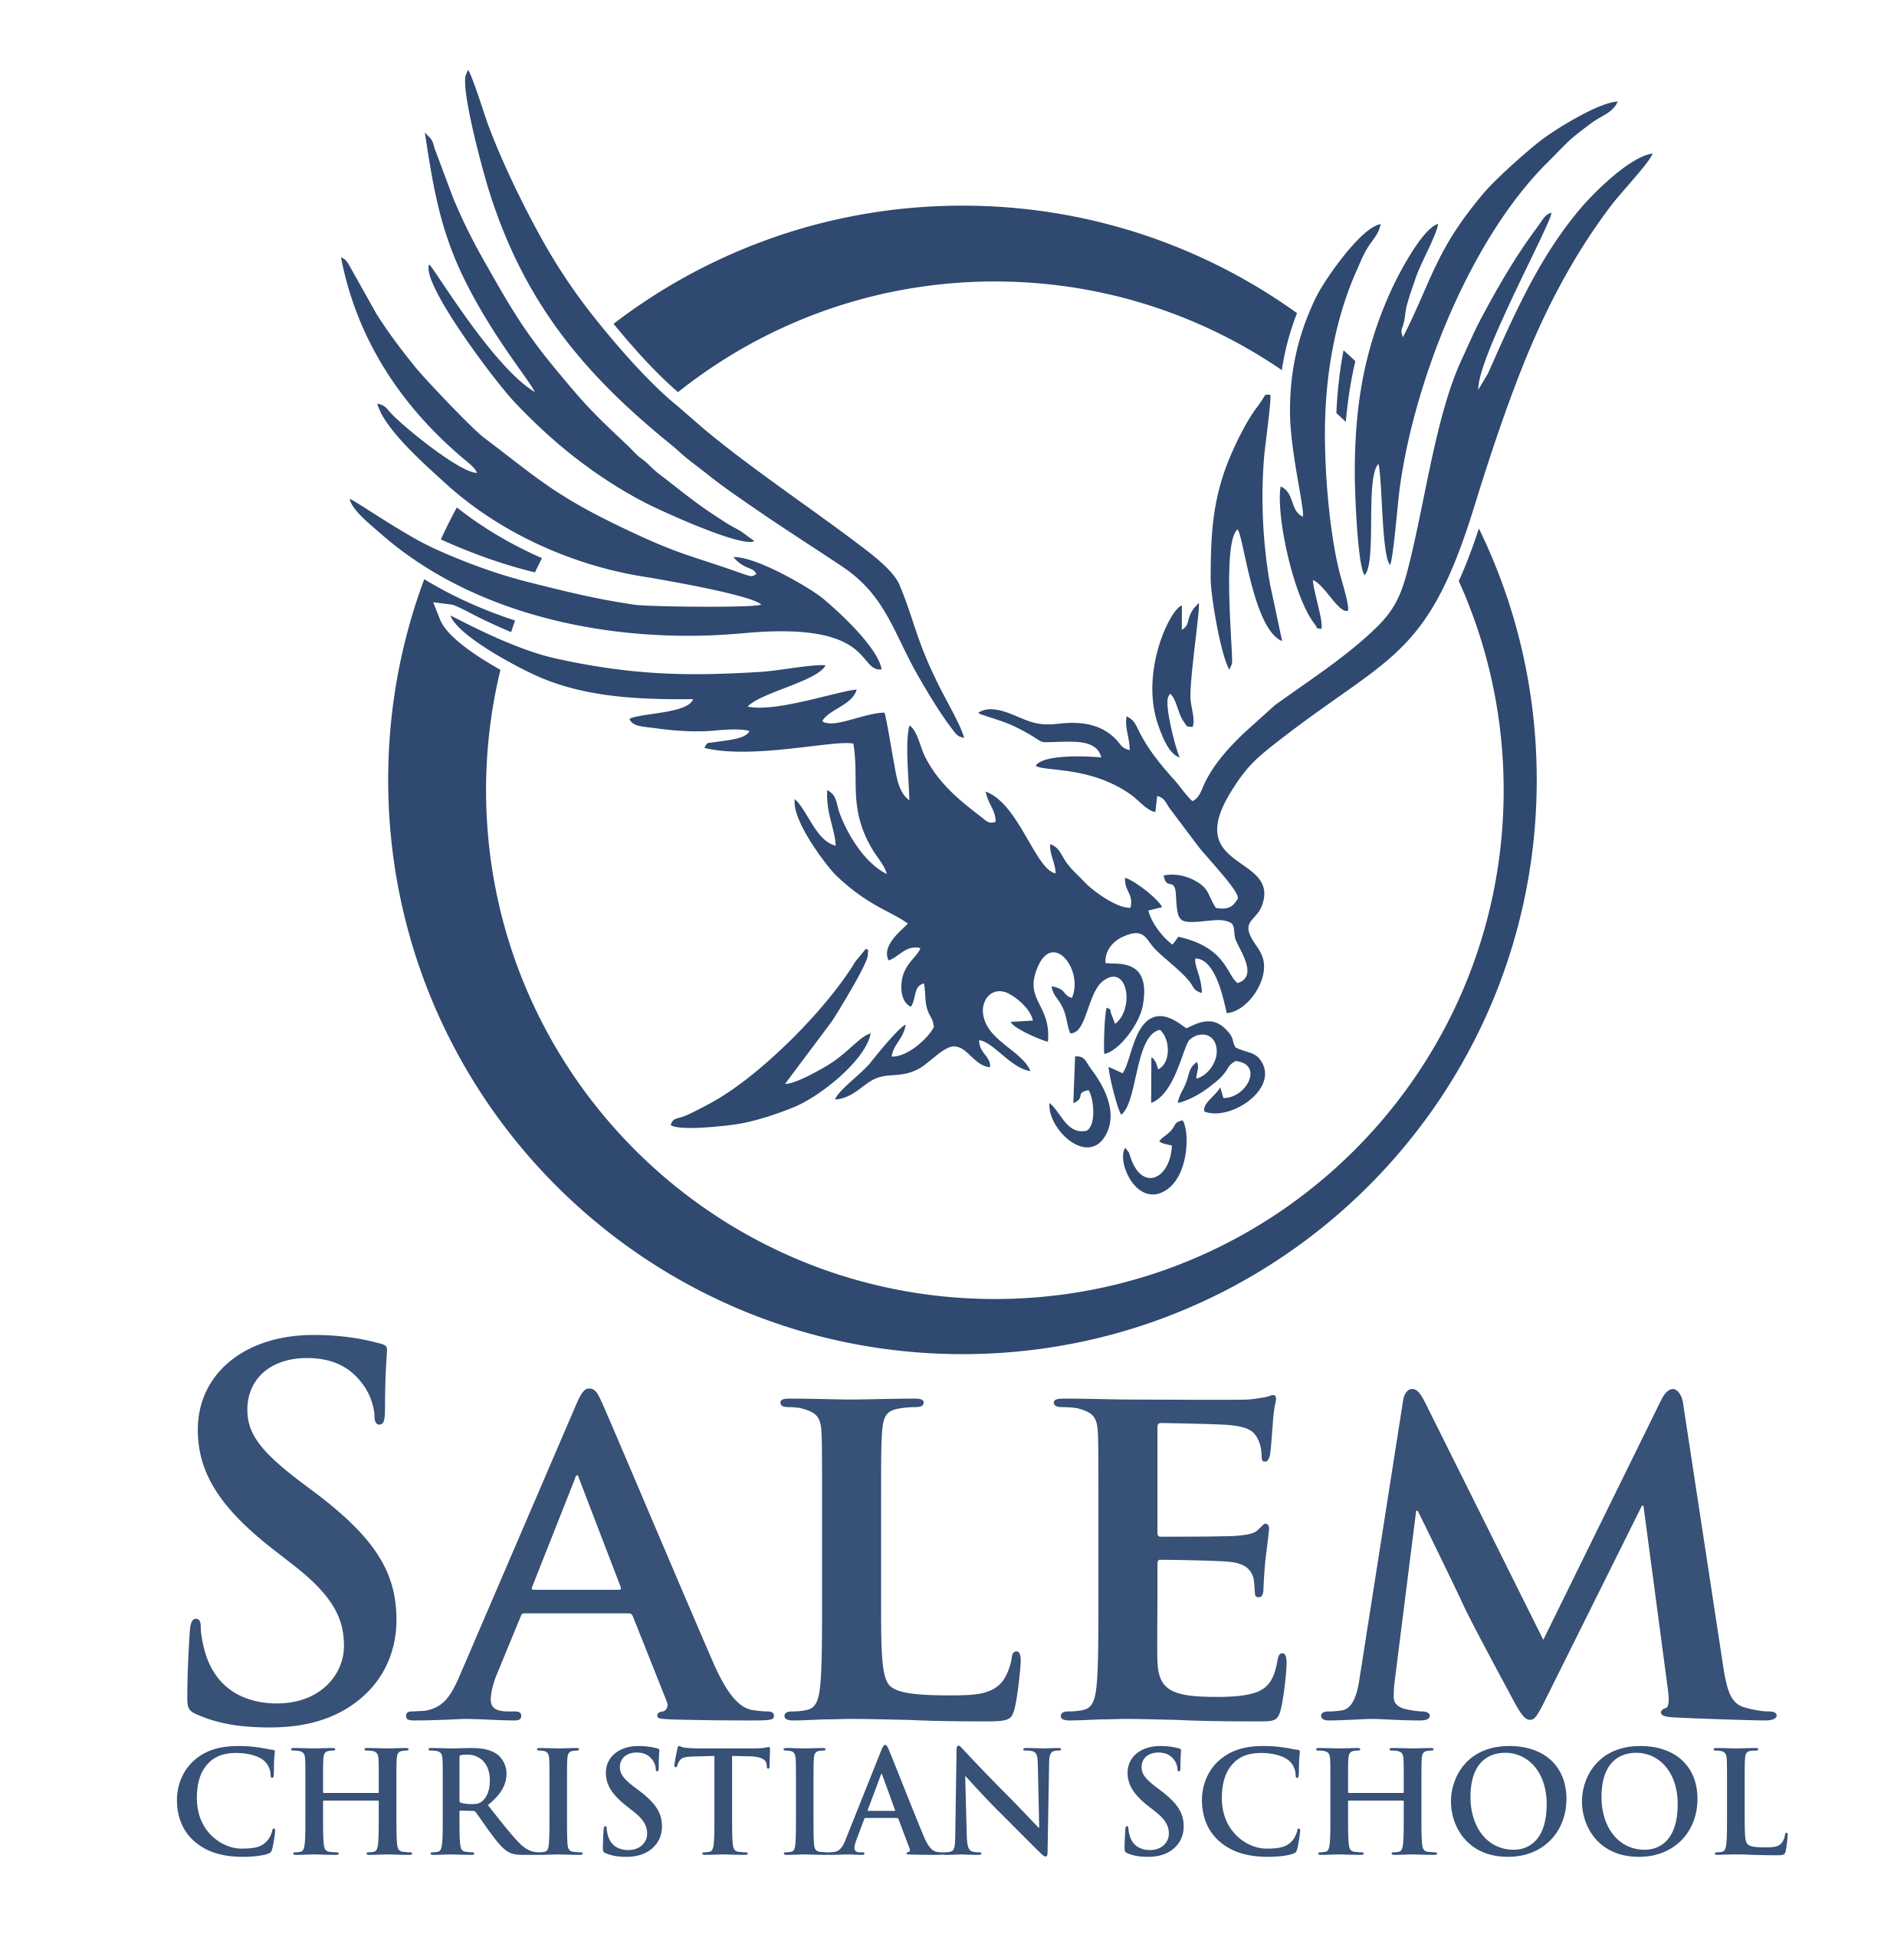 Eagle School Logo - As the eagle is an iconic symbol in America many schools use the ...